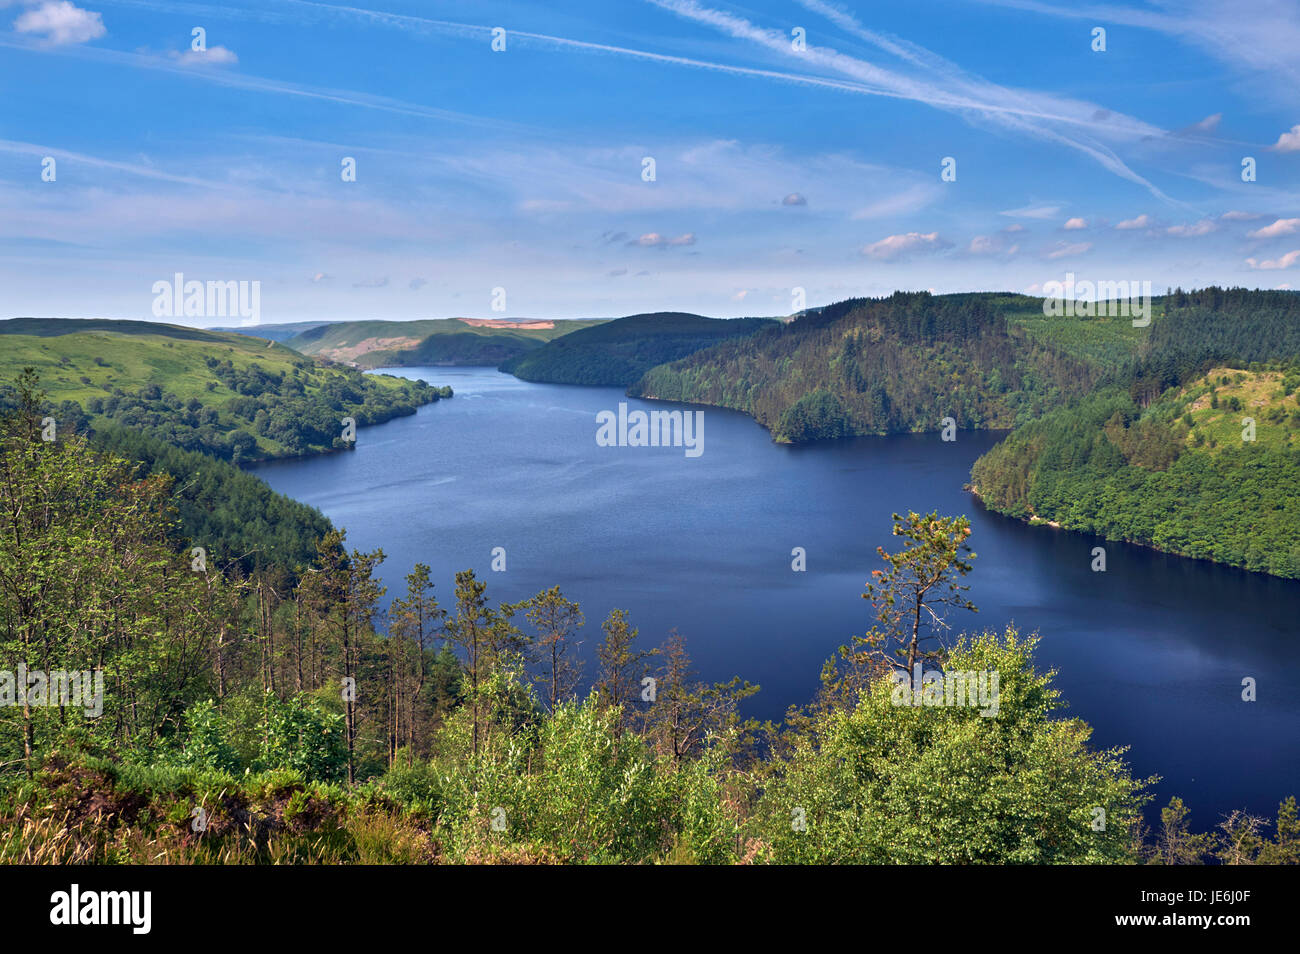 Llyn Brianne reservoir in the Towy Forest, completed in 1972. Powys, Wales. Stock Photo